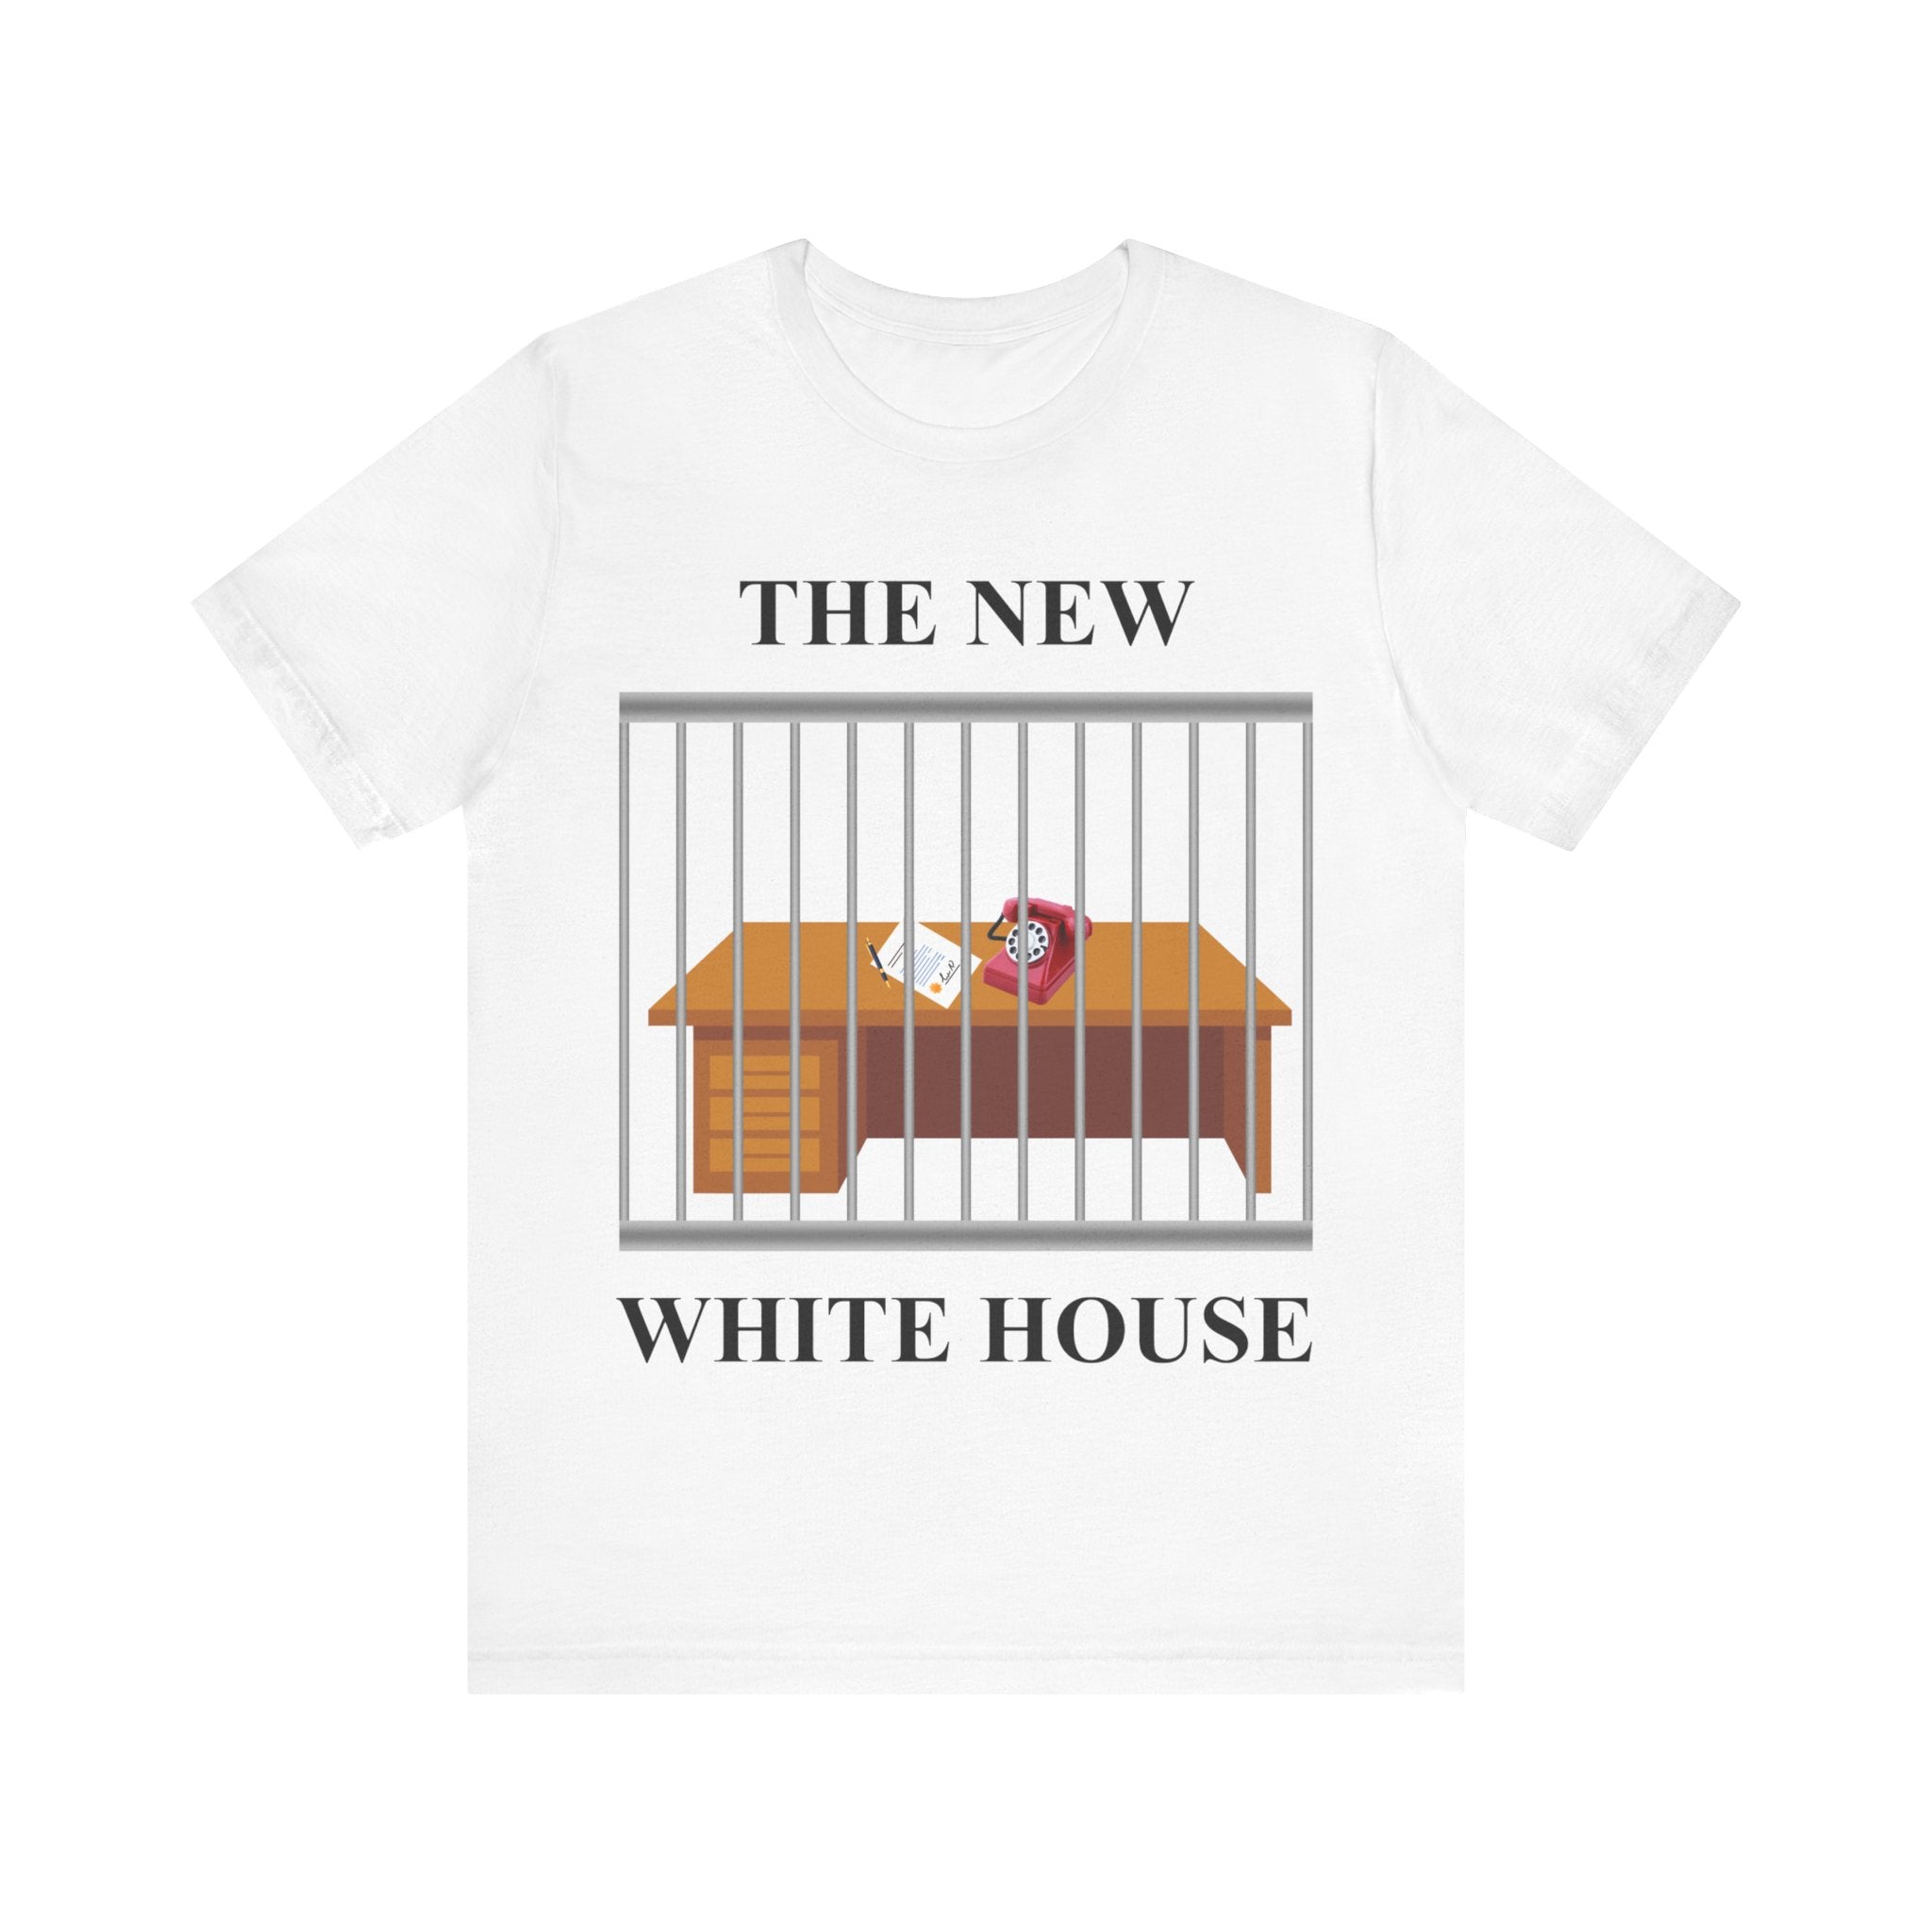 The New White House